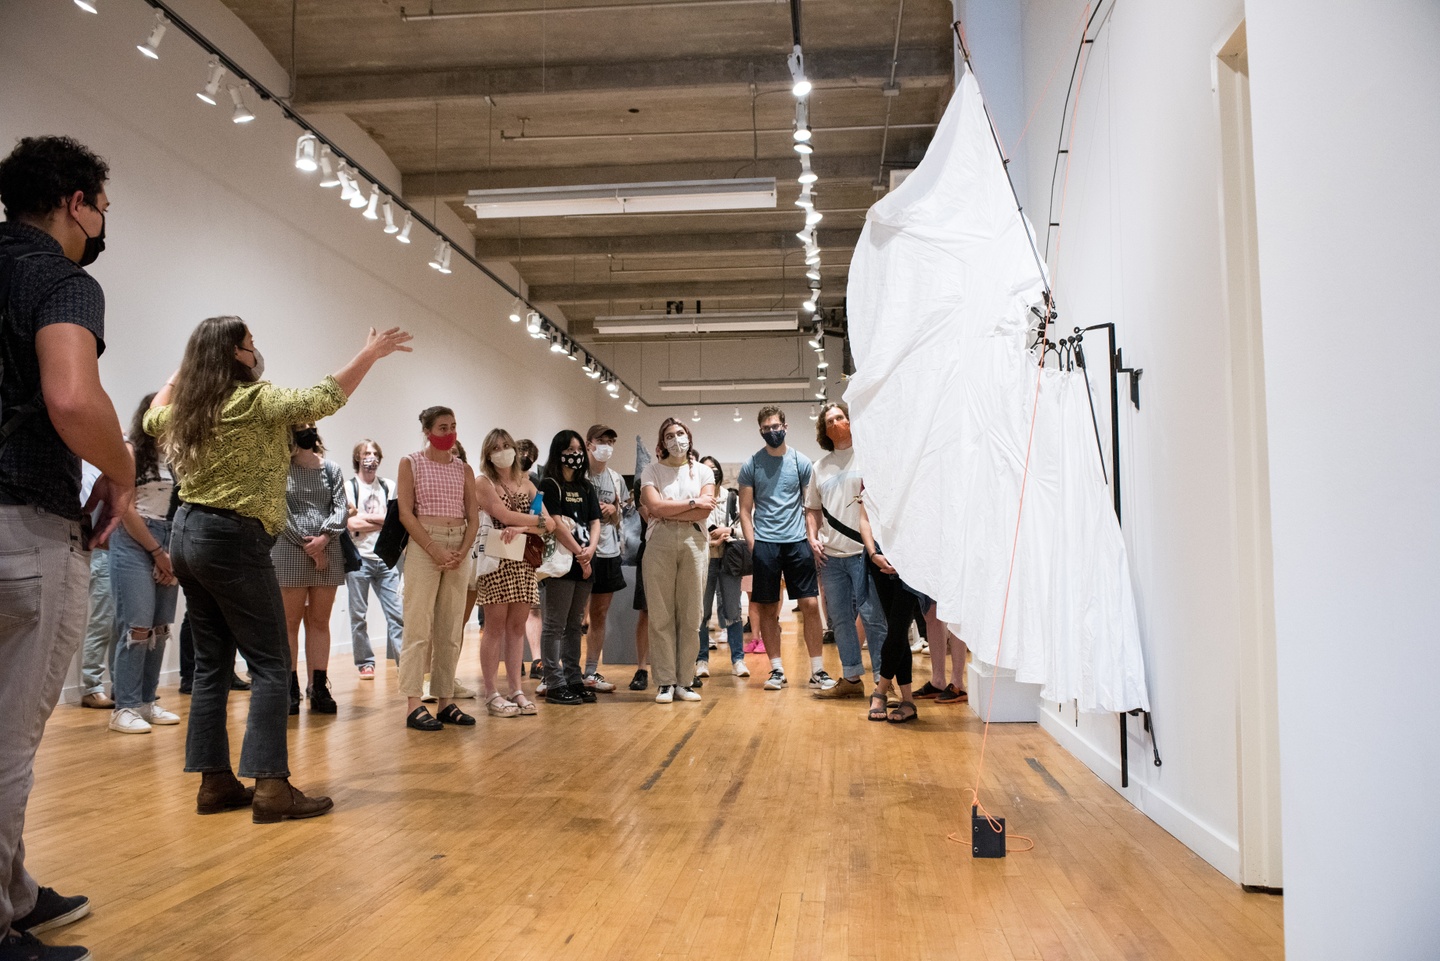 Artist delivers a gallery talk to visitors at a small gallery space. A white wing-like sculpture is seen in the foreground.